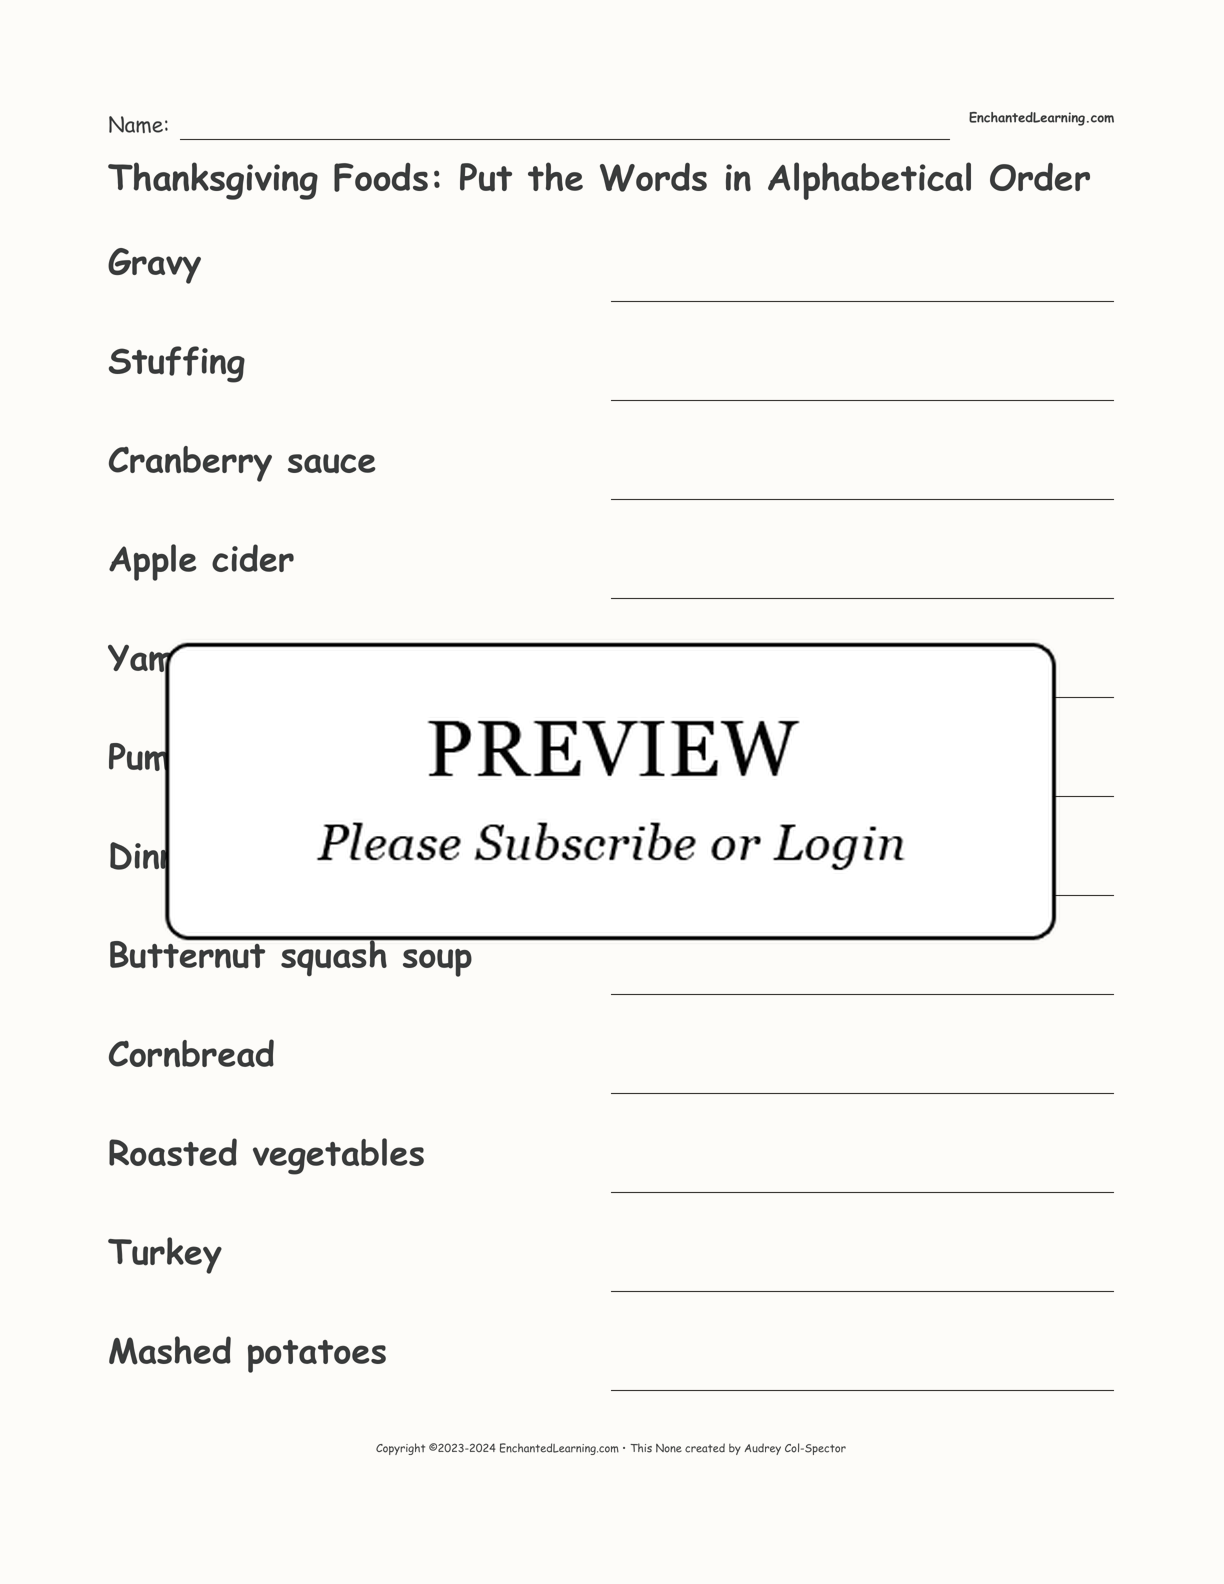 Thanksgiving Foods: Put the Words in Alphabetical Order interactive worksheet page 1